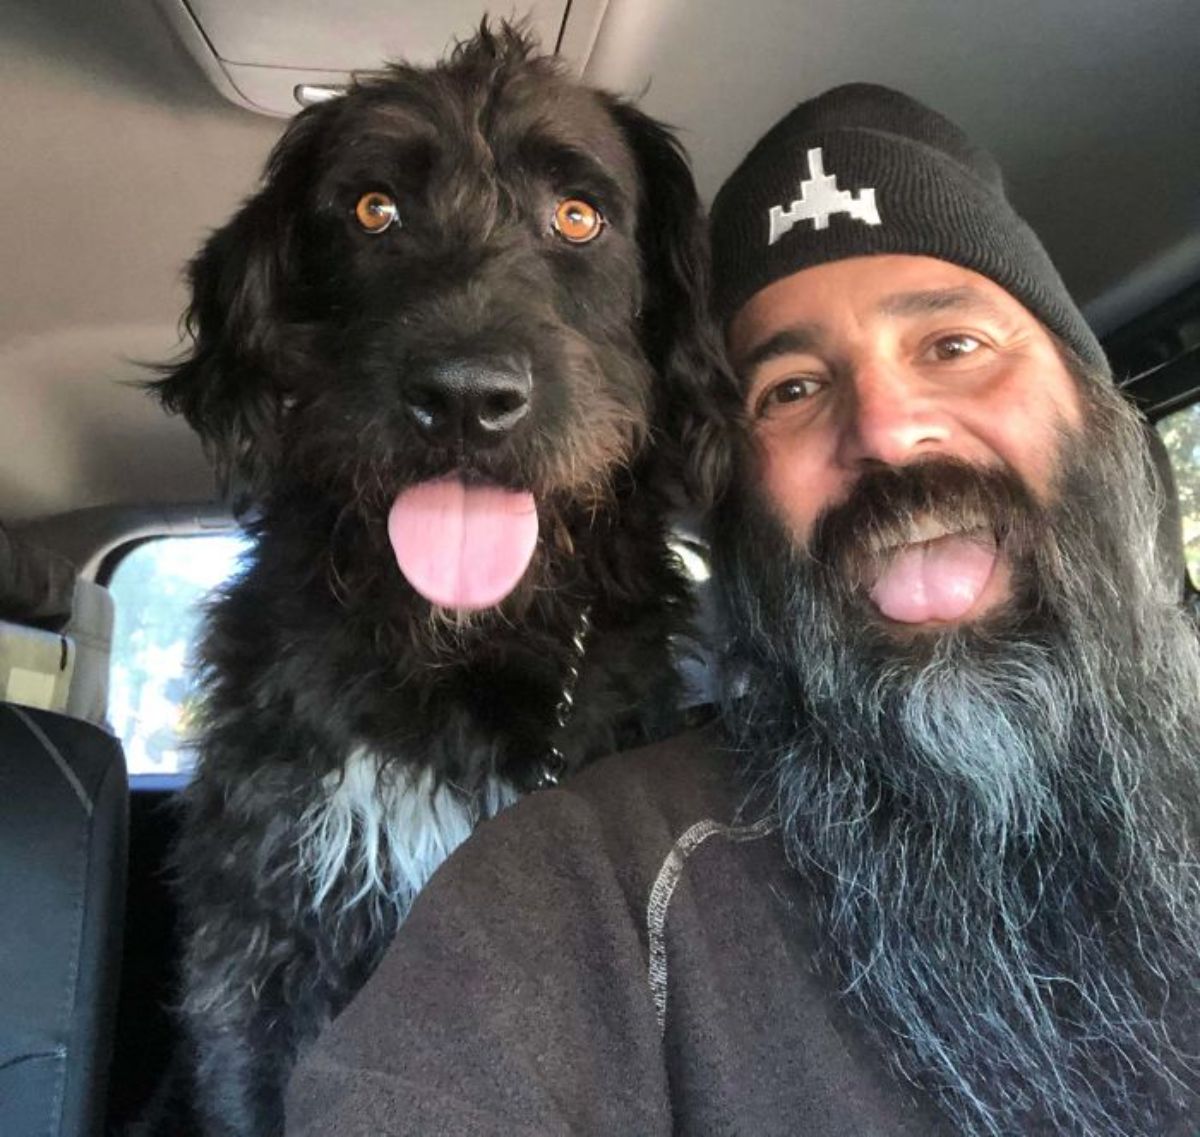 black fluffy dog with white chest patch inside a car with the tongue sticking out next to a bearded man with his tongue sticking out